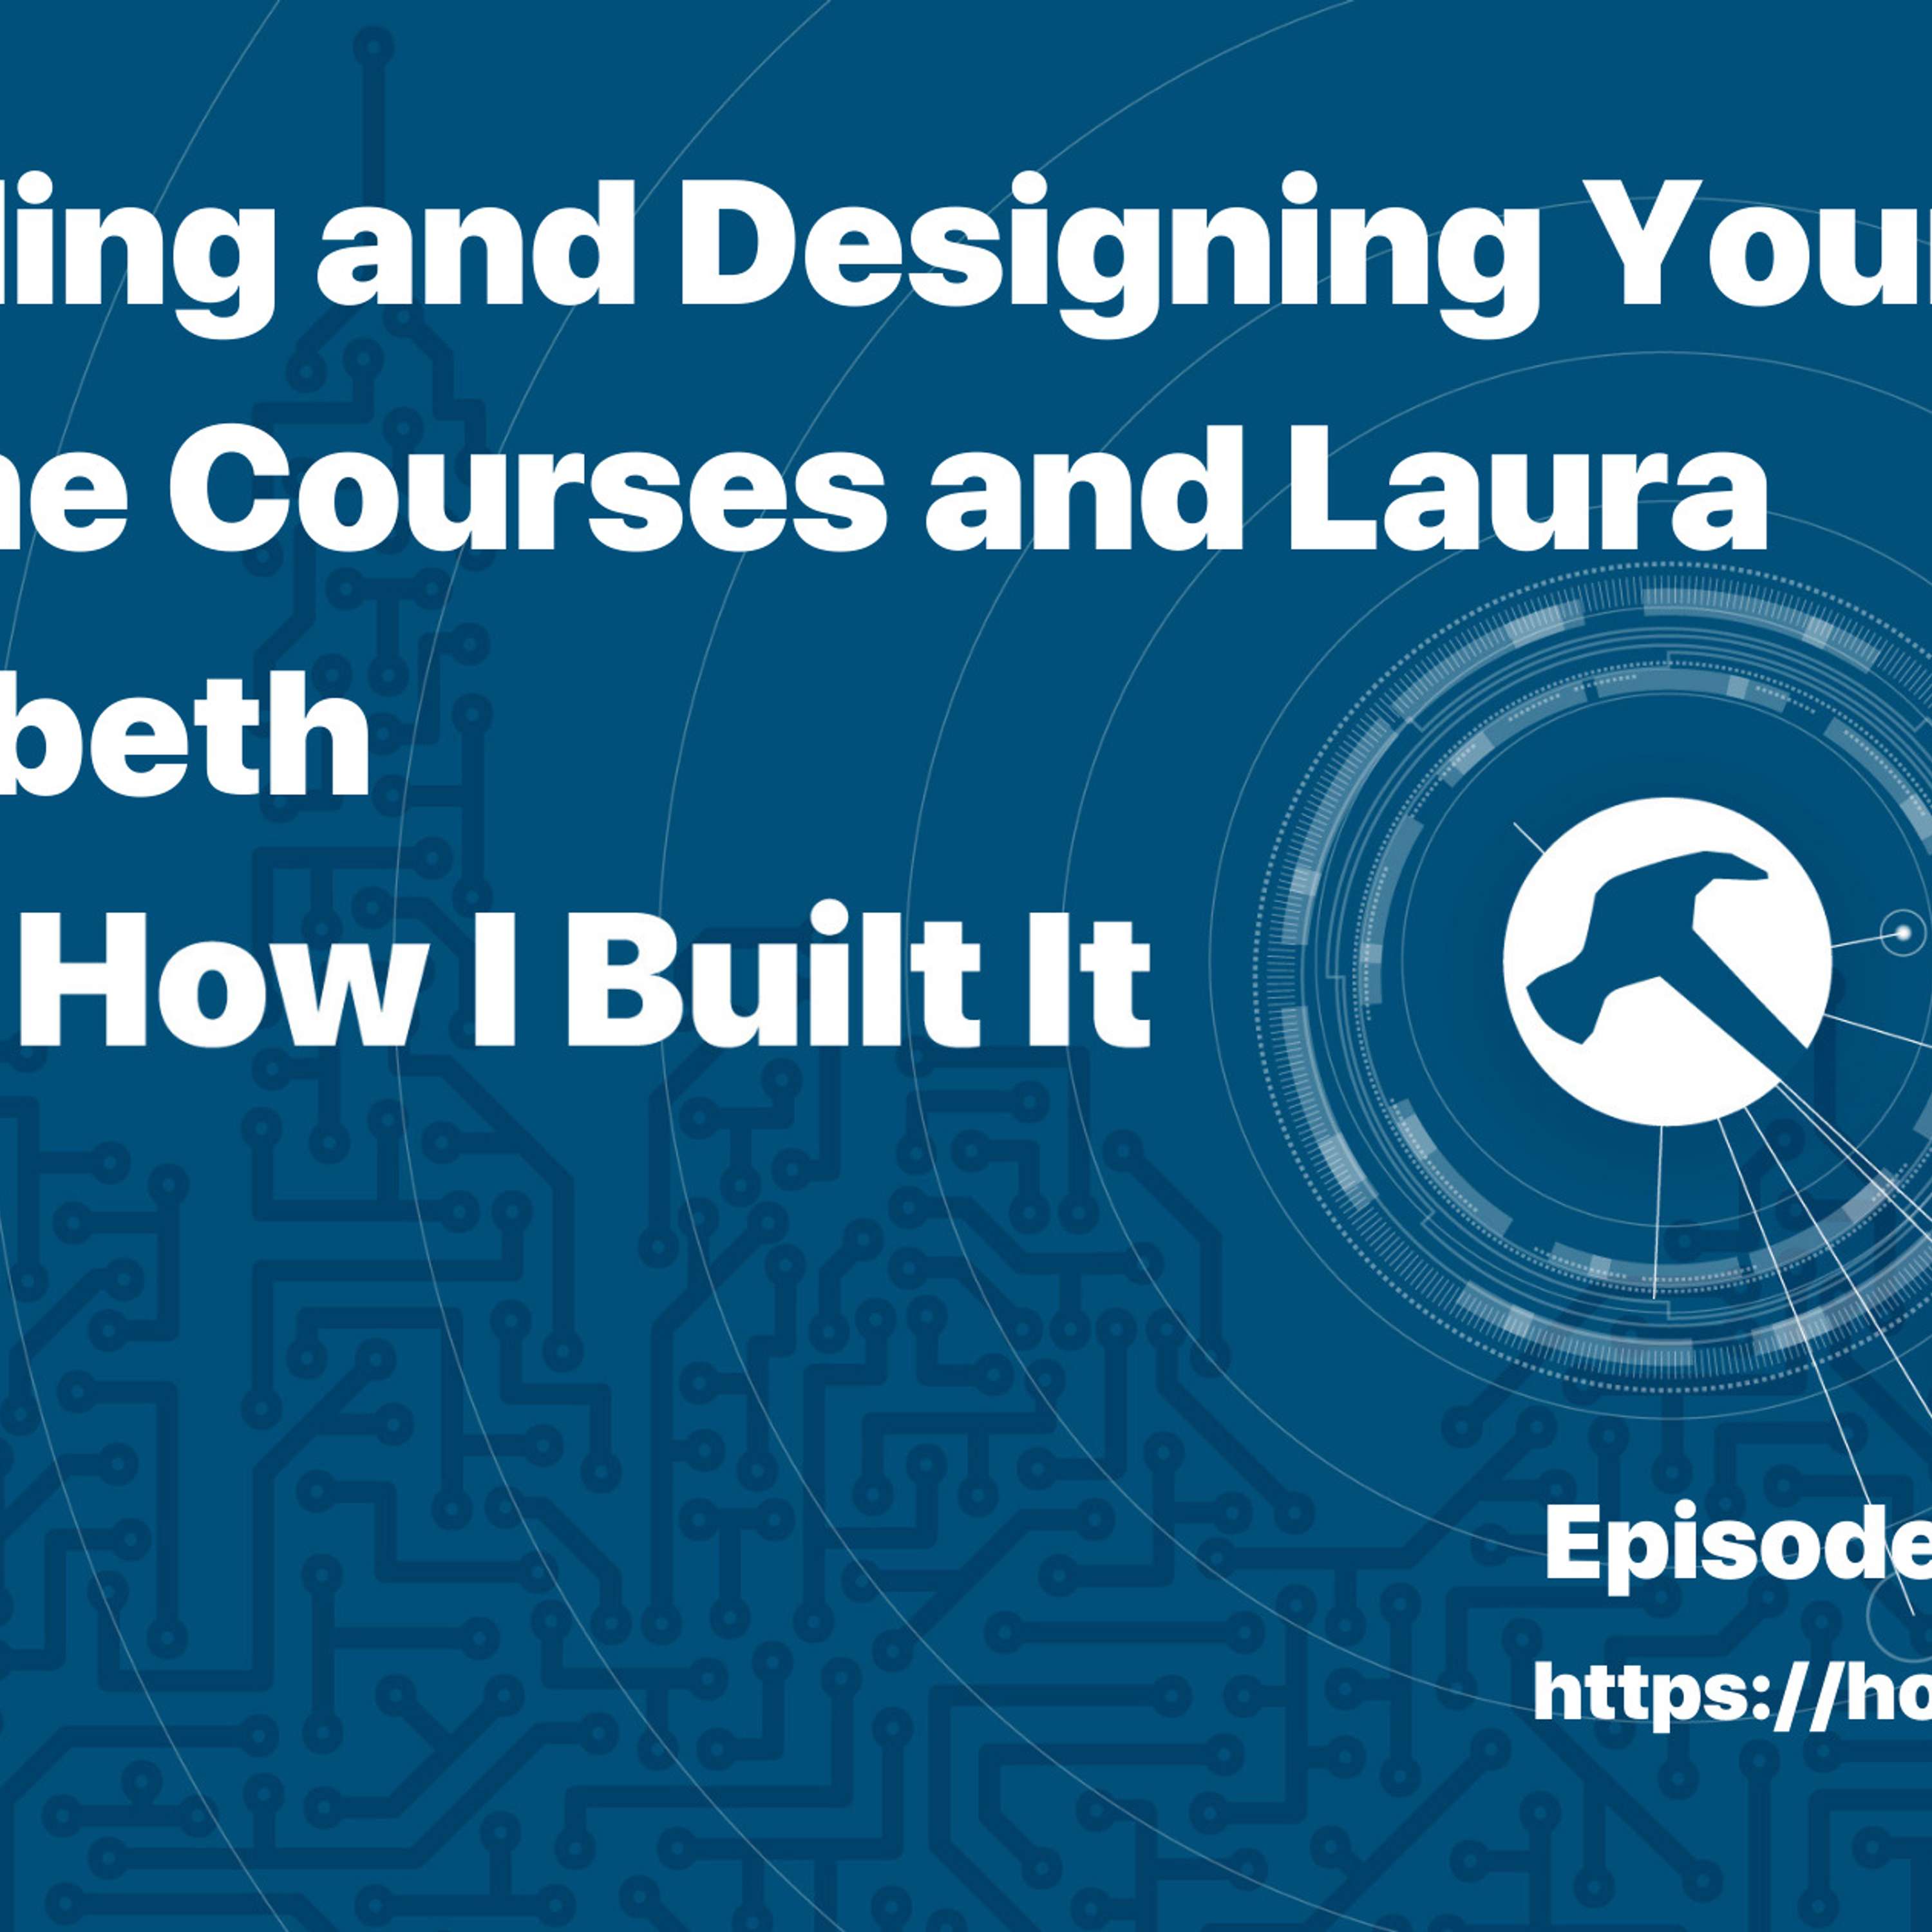 Building and Designing Your Online Courses and Laura Elizabeth